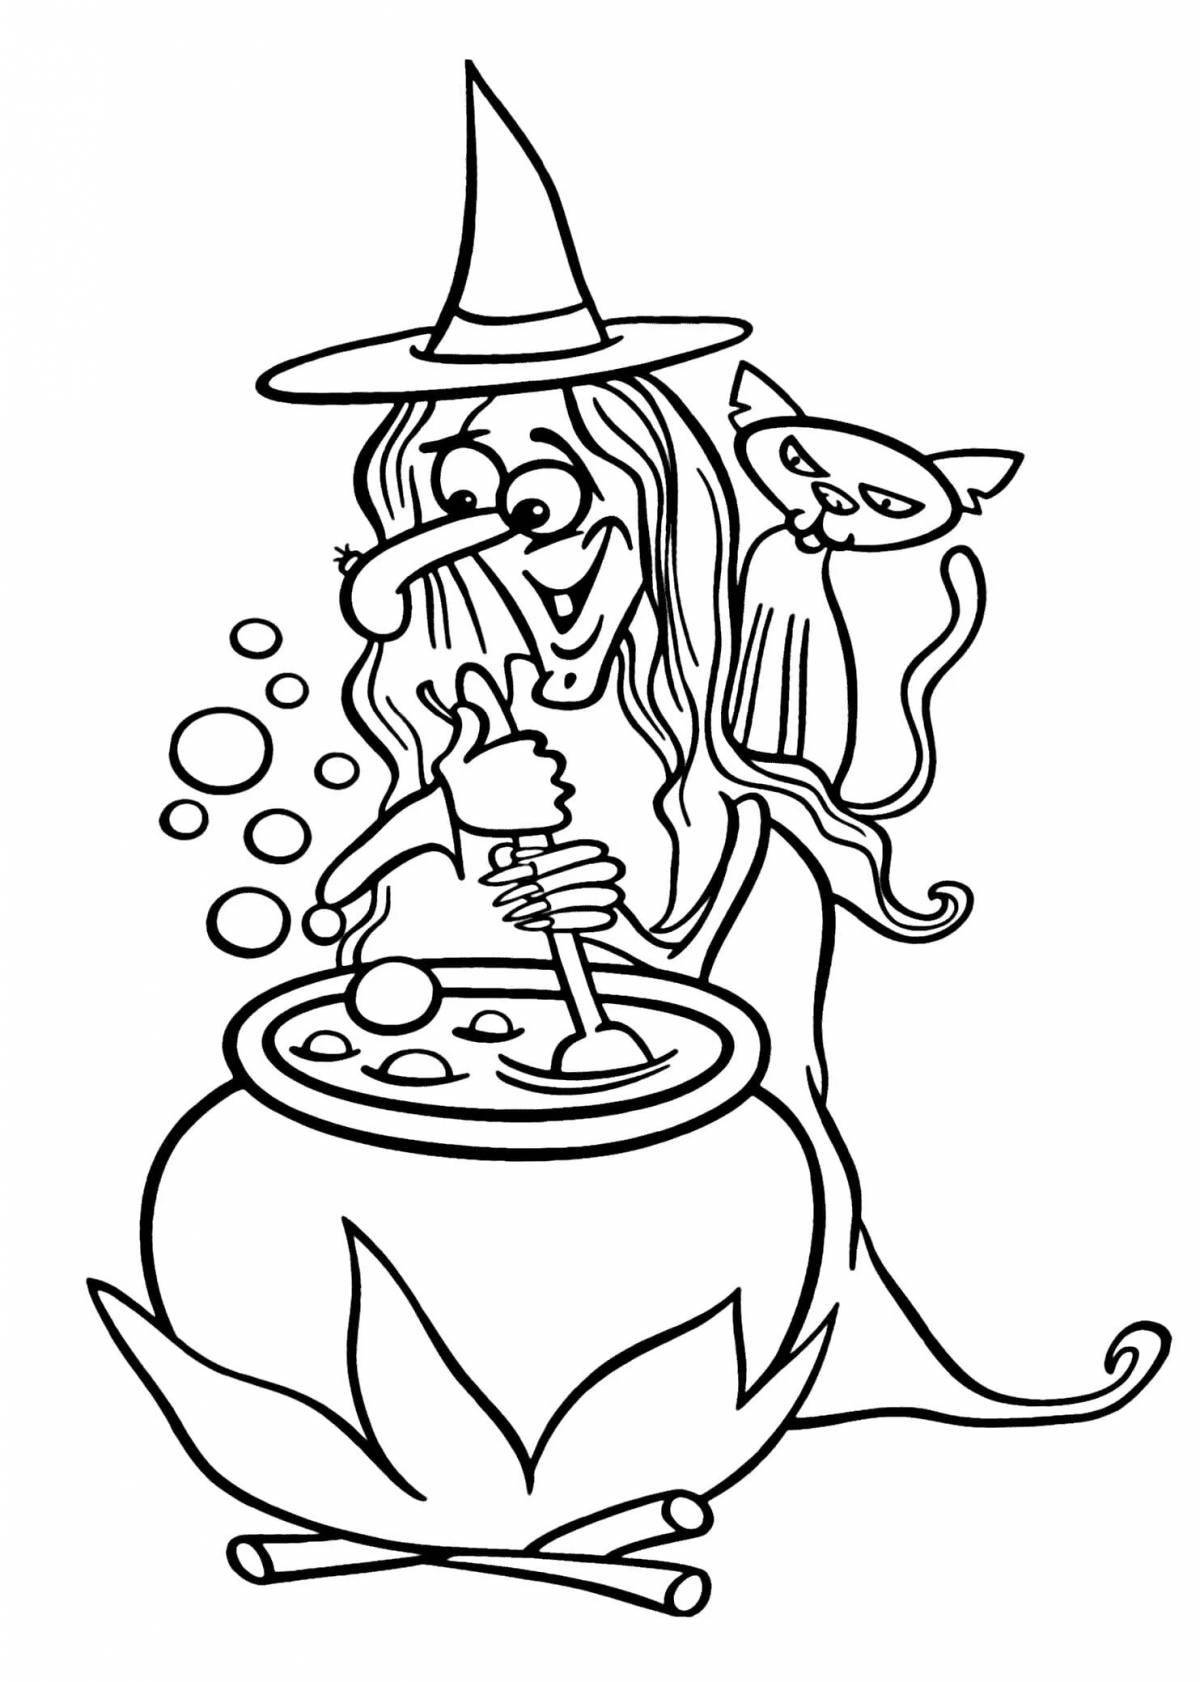 Exquisite witch coloring book